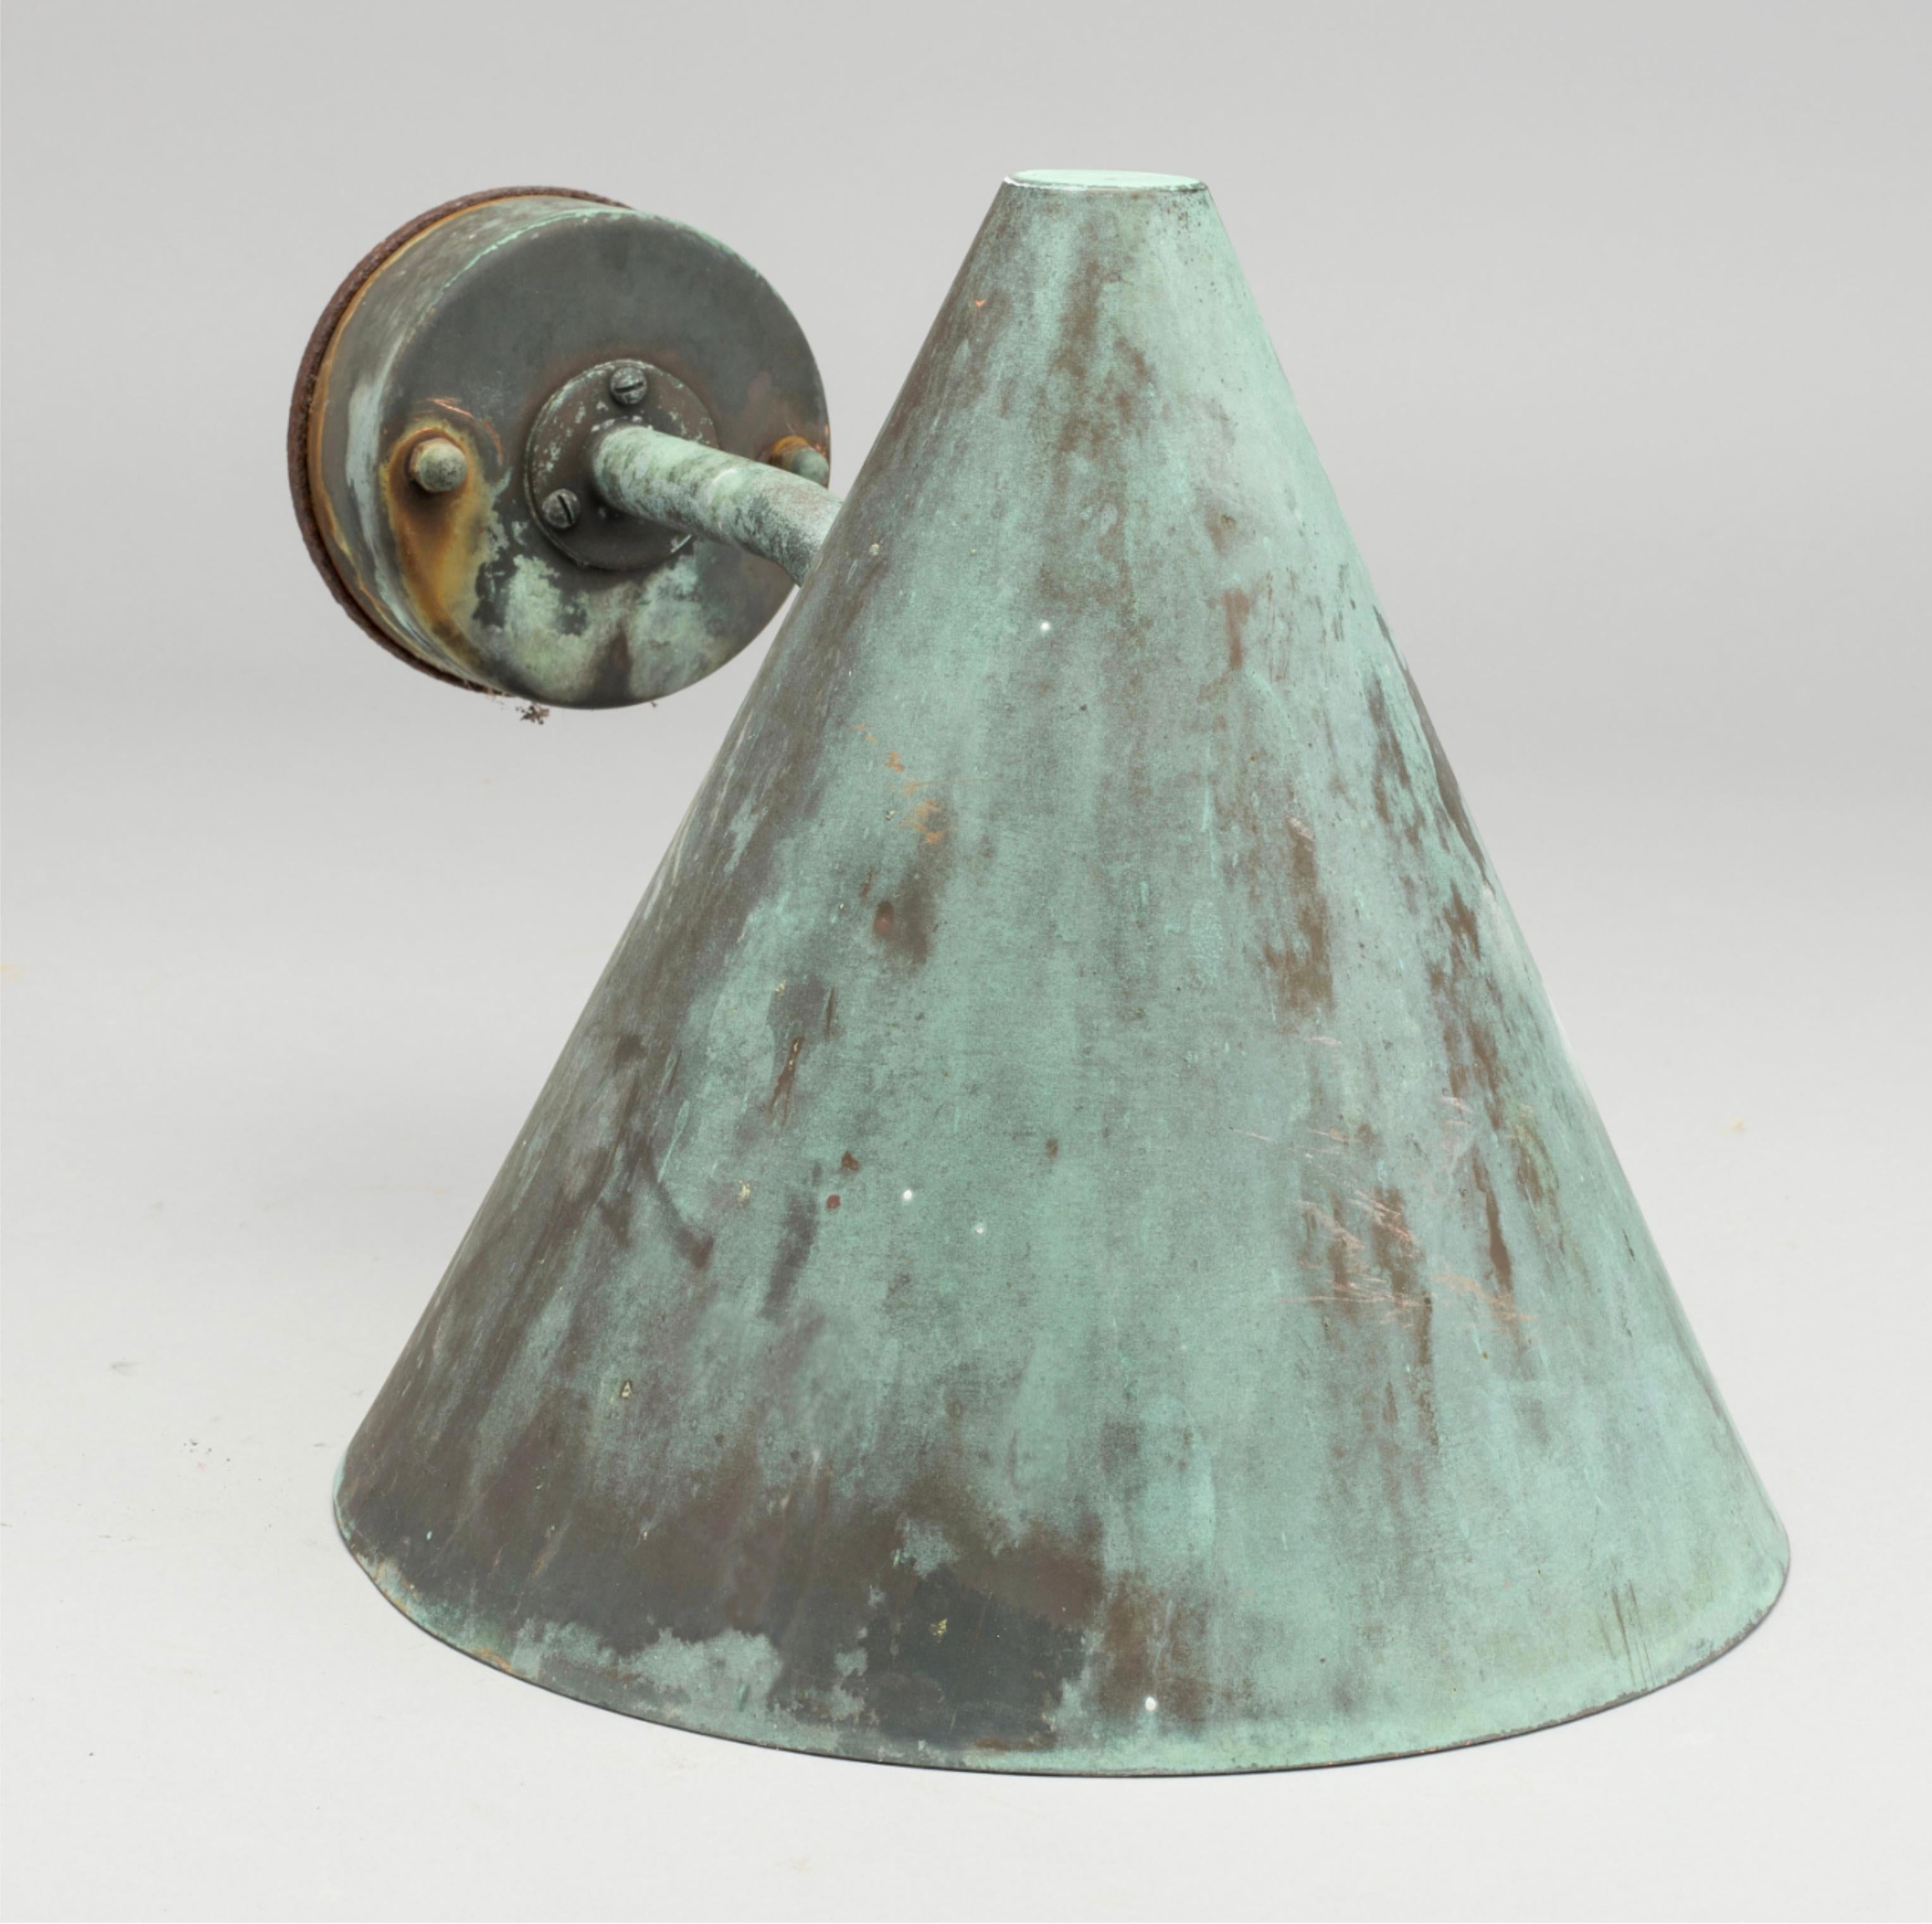 Hans-Agne Jakobsson for AB Markaryd, set of outdoor wall lights in copper. Sweden, 1950s.
Large cone-shaped wall lights designed by Hans-Agne Jakobsson for AB Markaryd, in beautifully patinated copper. The exiting shape of the fixture is lovely